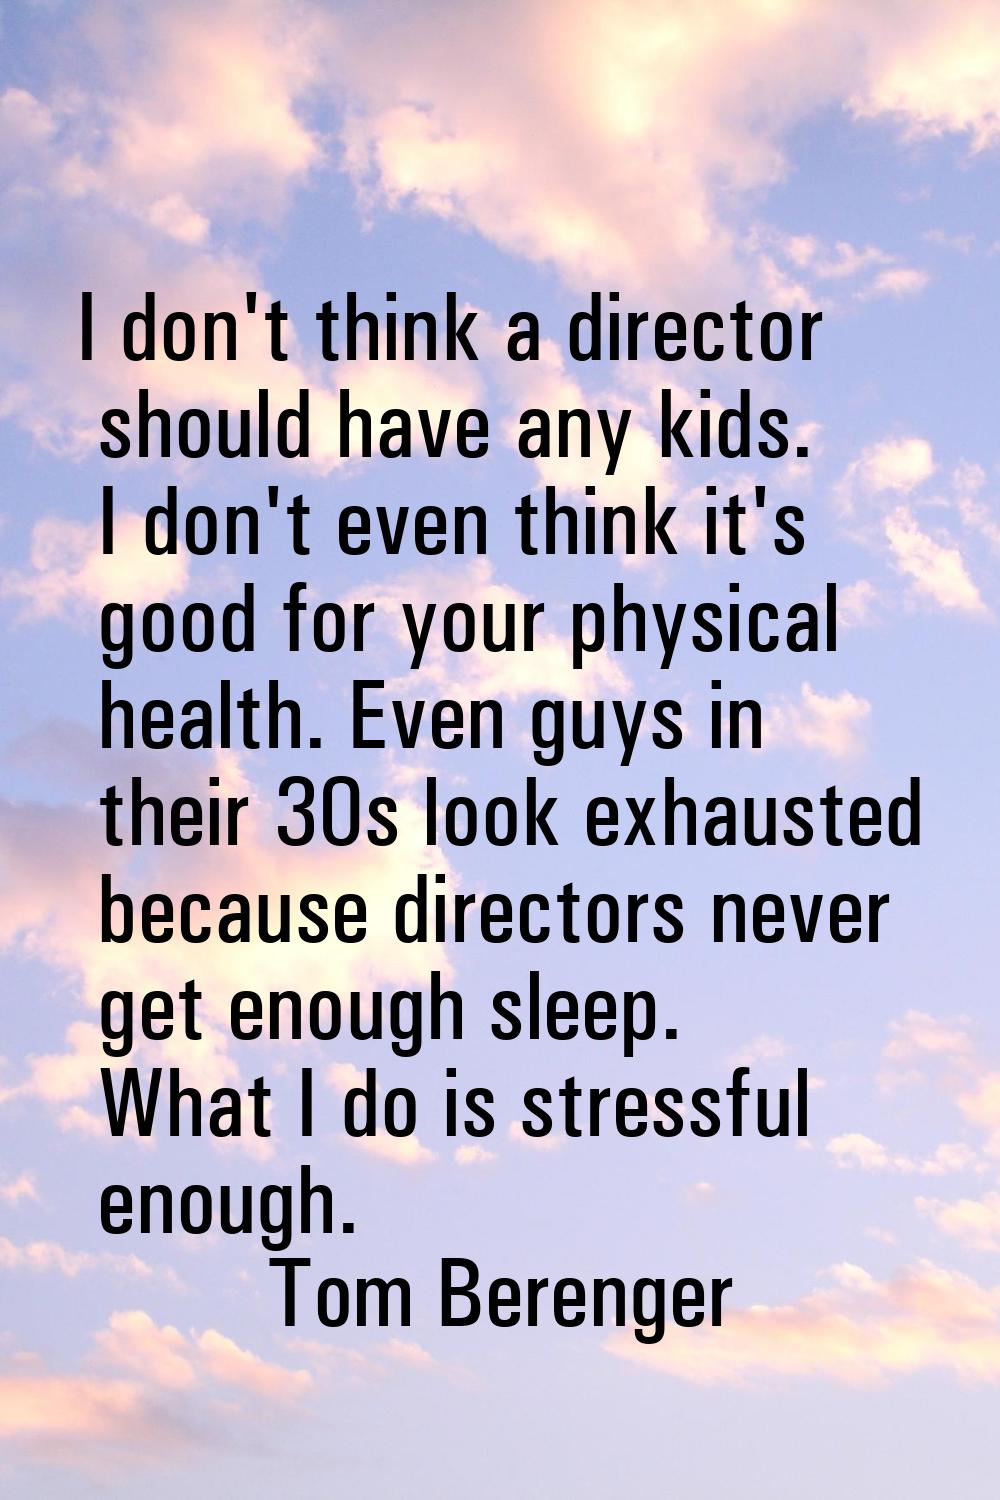 I don't think a director should have any kids. I don't even think it's good for your physical healt